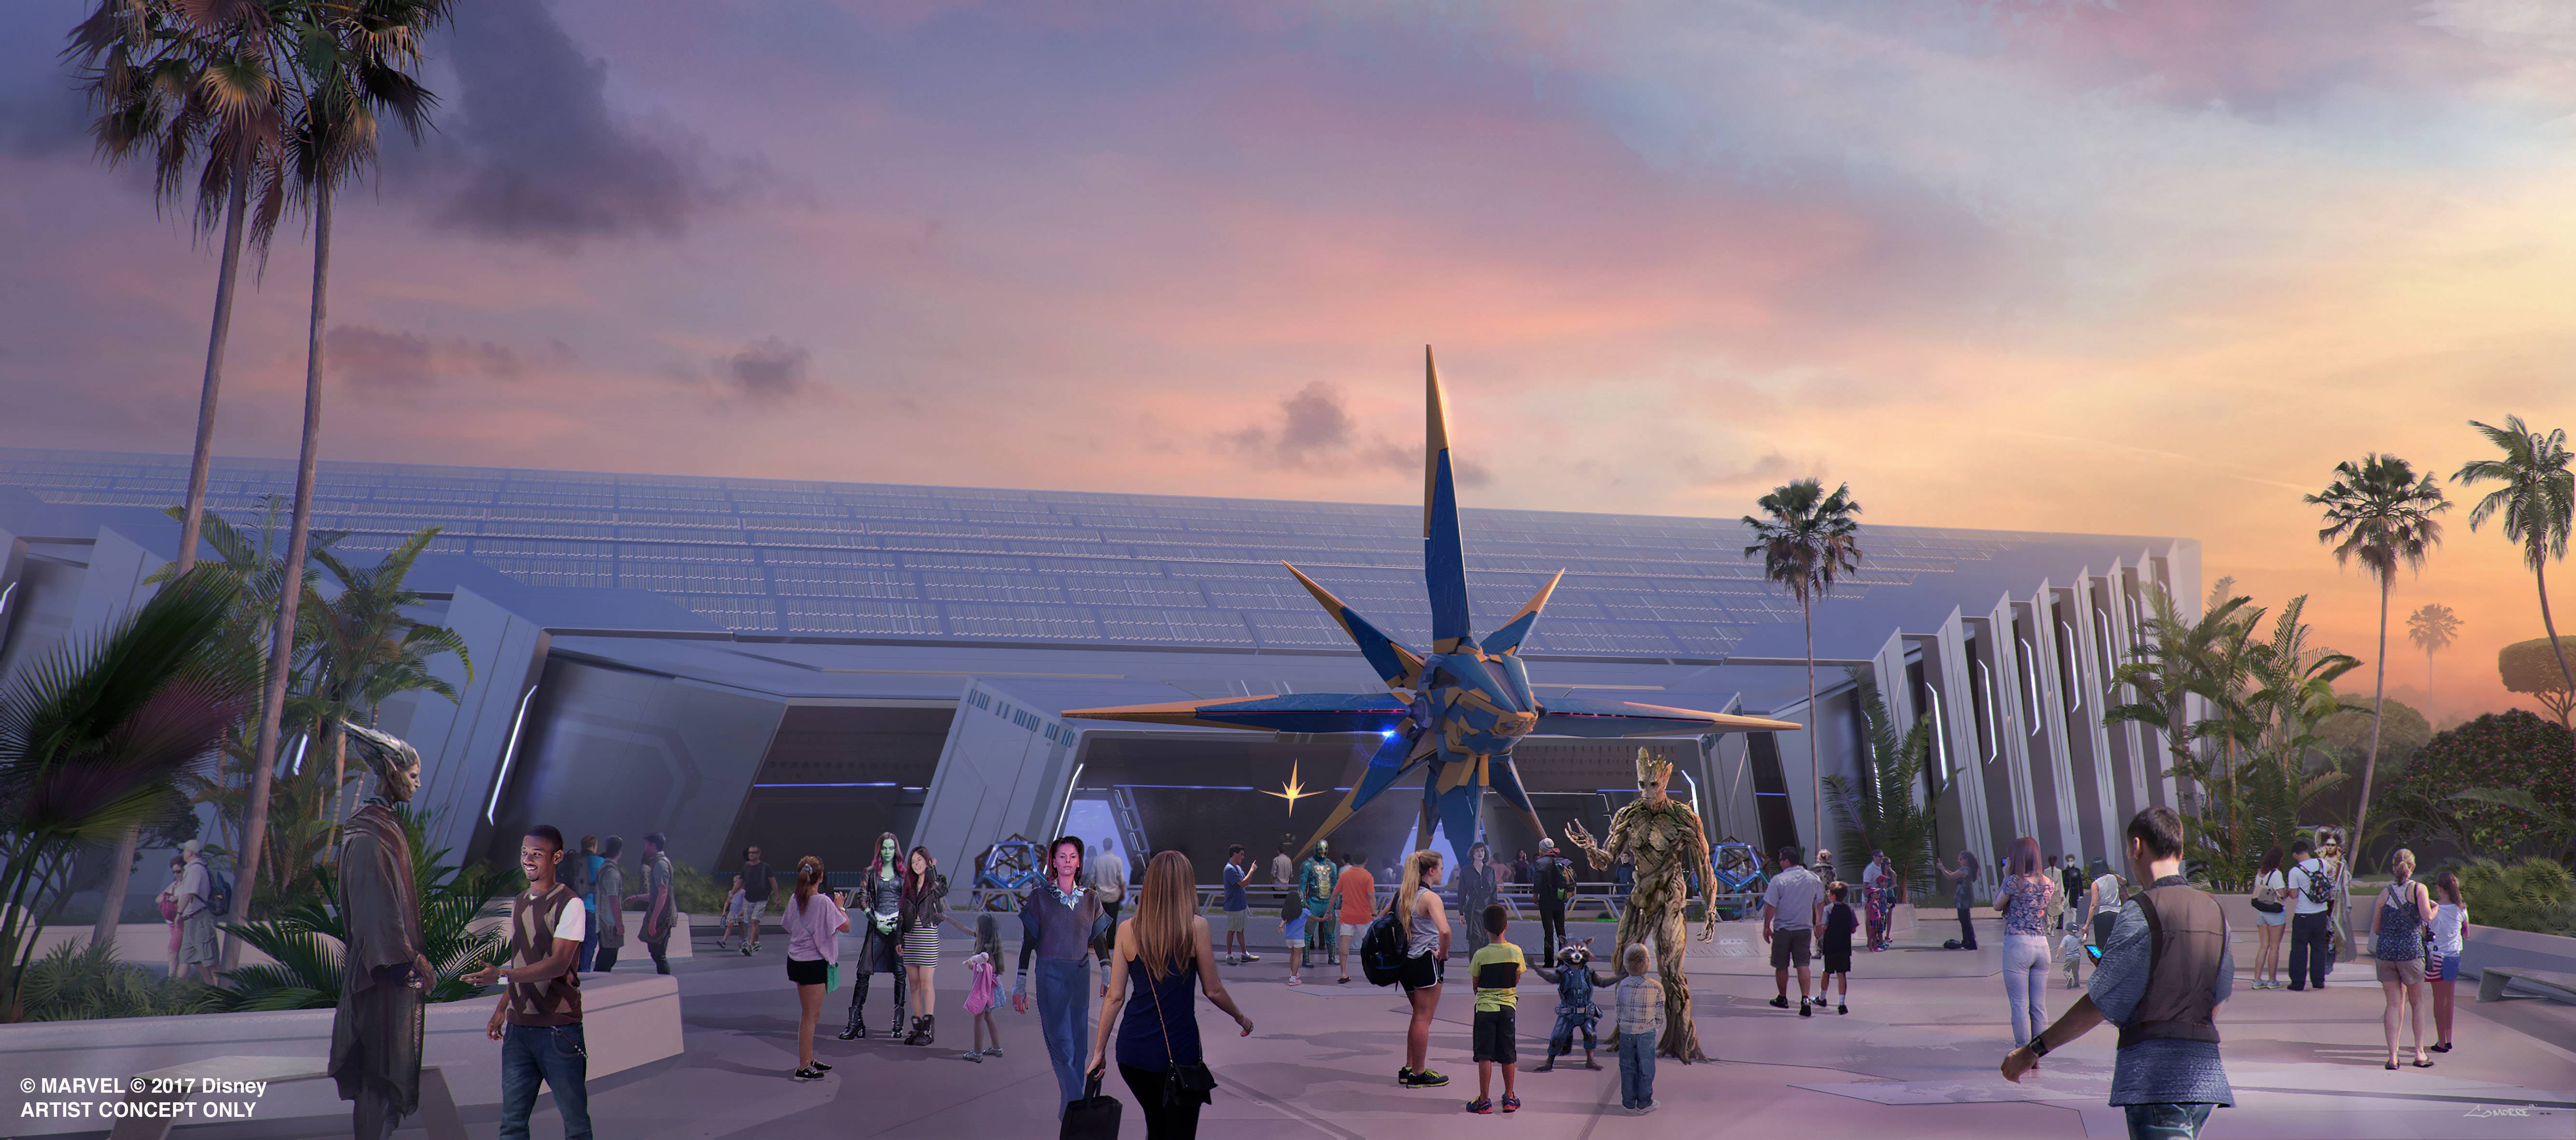 Perhaps we will learn more about Guardians of the Galaxy coming to Epcot